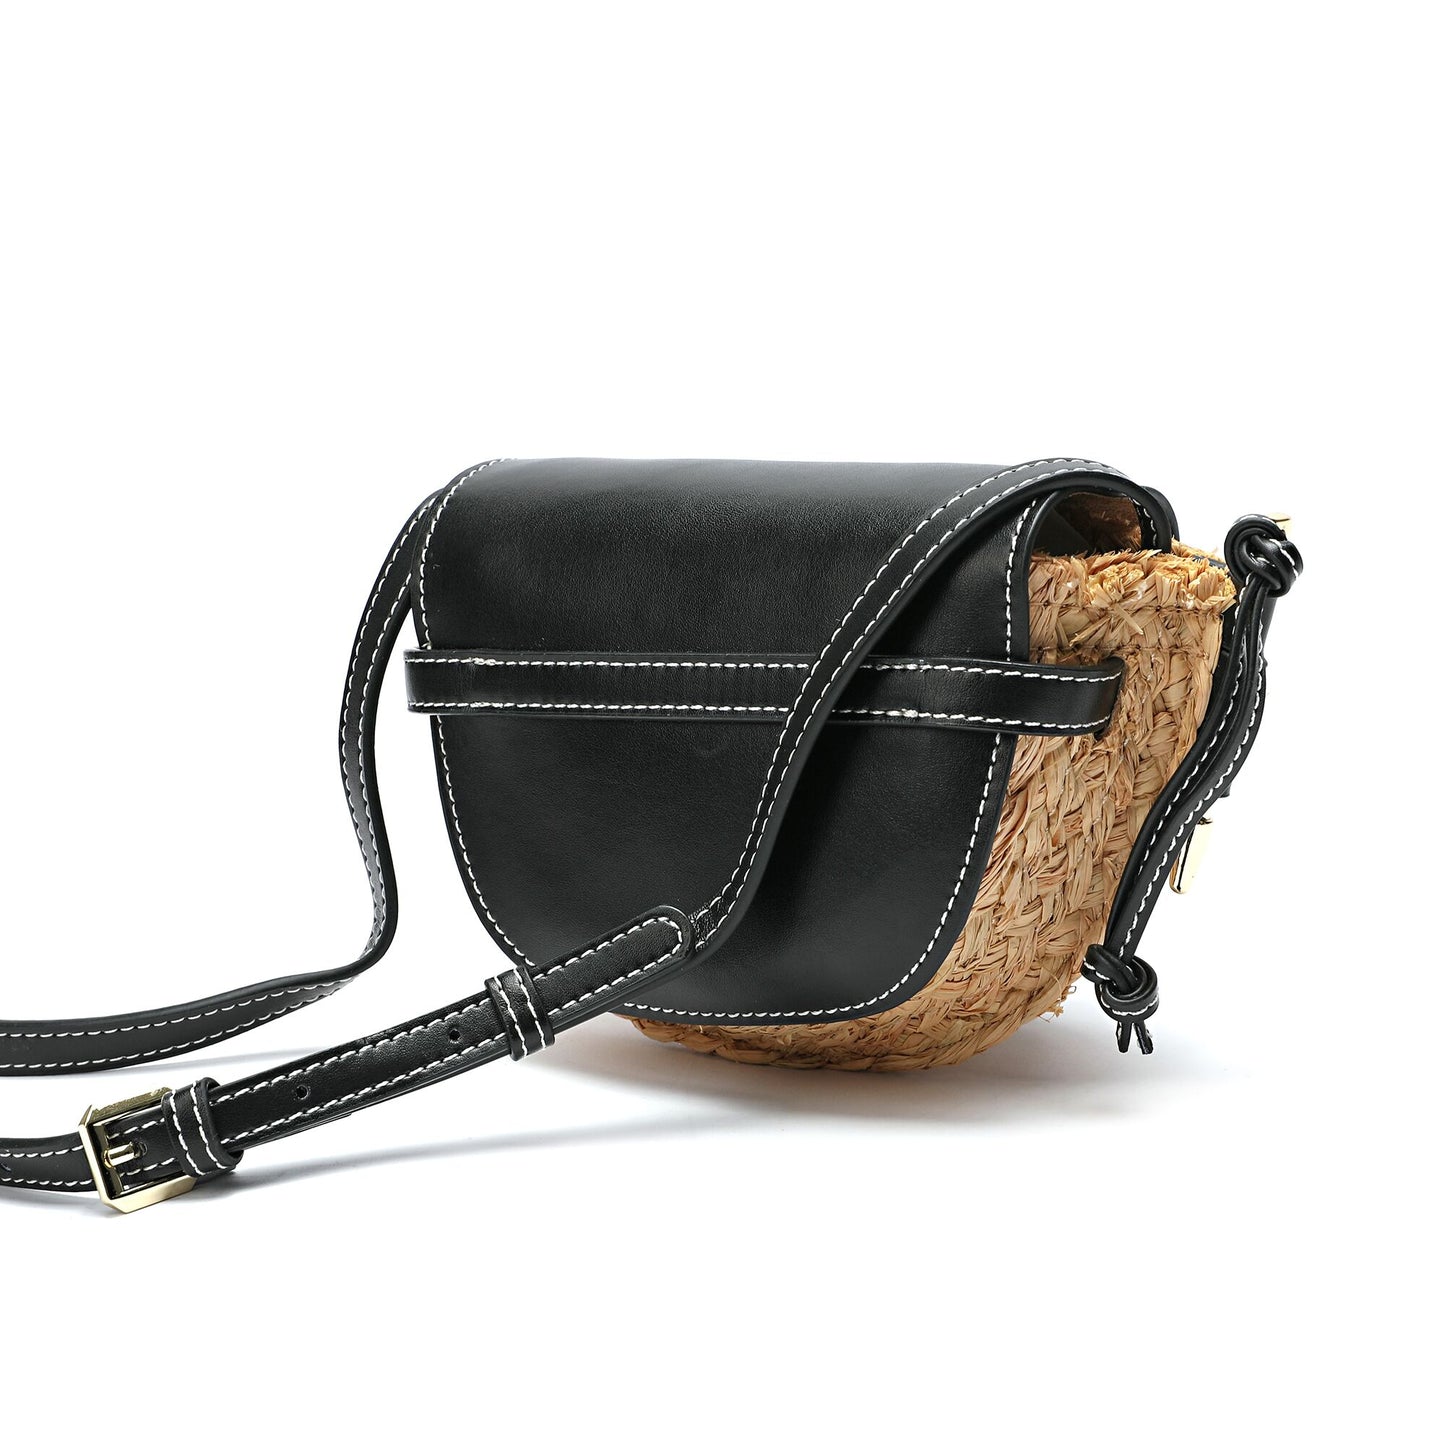 Full-grain Smooth Leather/ Straw Crossbody Bag With Bow Accent